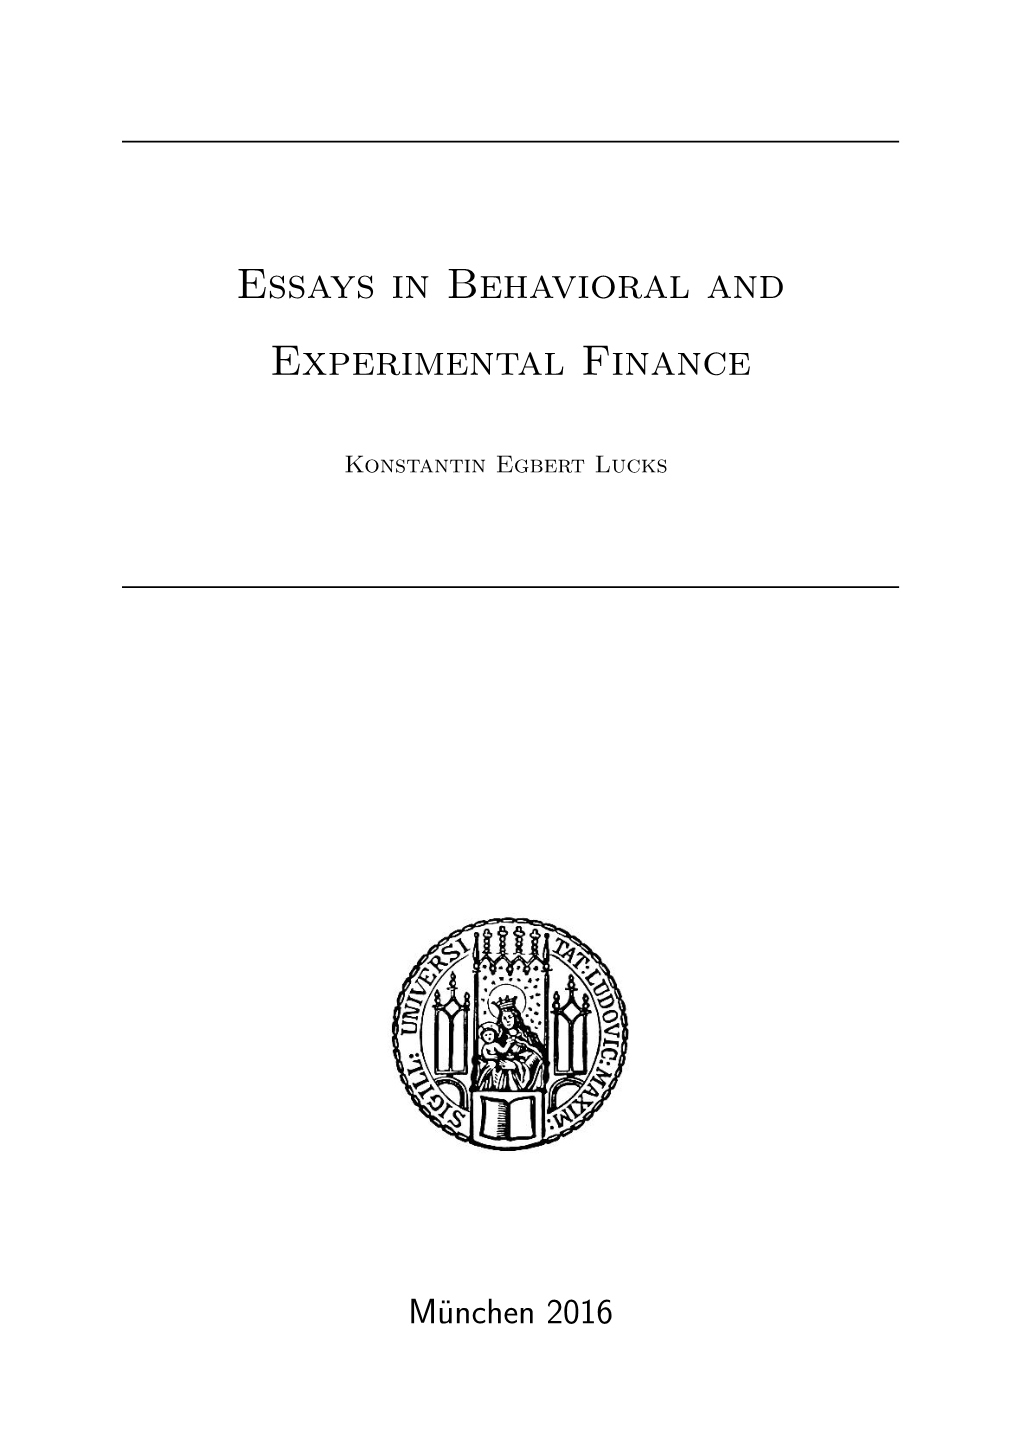 Essays in Behavioral and Experimental Finance